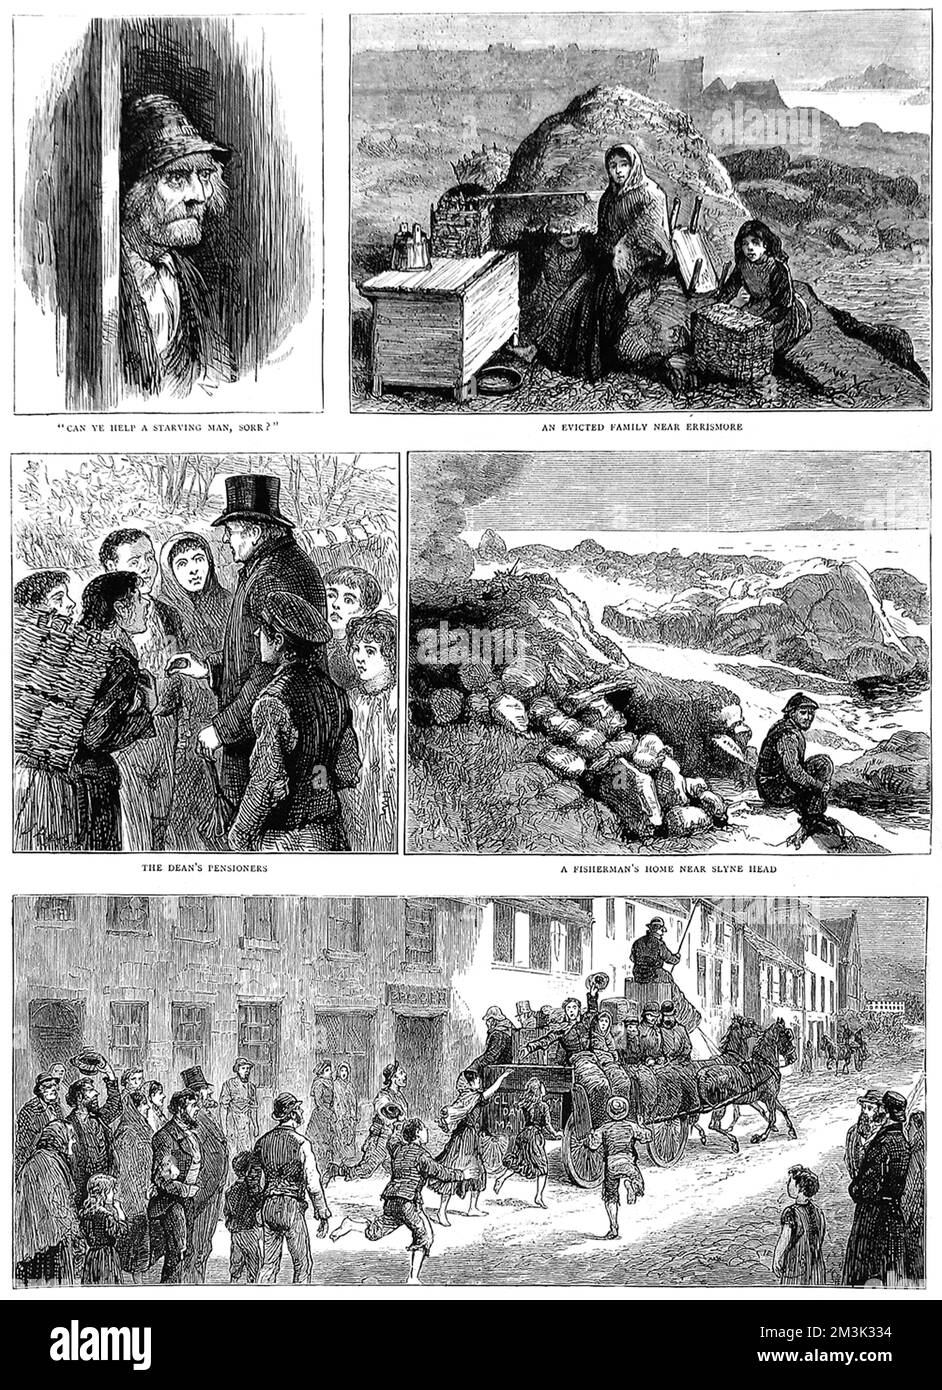 These scenes show the poverty, homelessness and resulting emigration of the Irish to America. The first four scenes are of destitution and hunger. These miserable conditions were brought on by the potato famine in the mid 19th century and further compounded by the forced evictions of poverty-stricken peasants from their homes and farms.  1880 Stock Photo